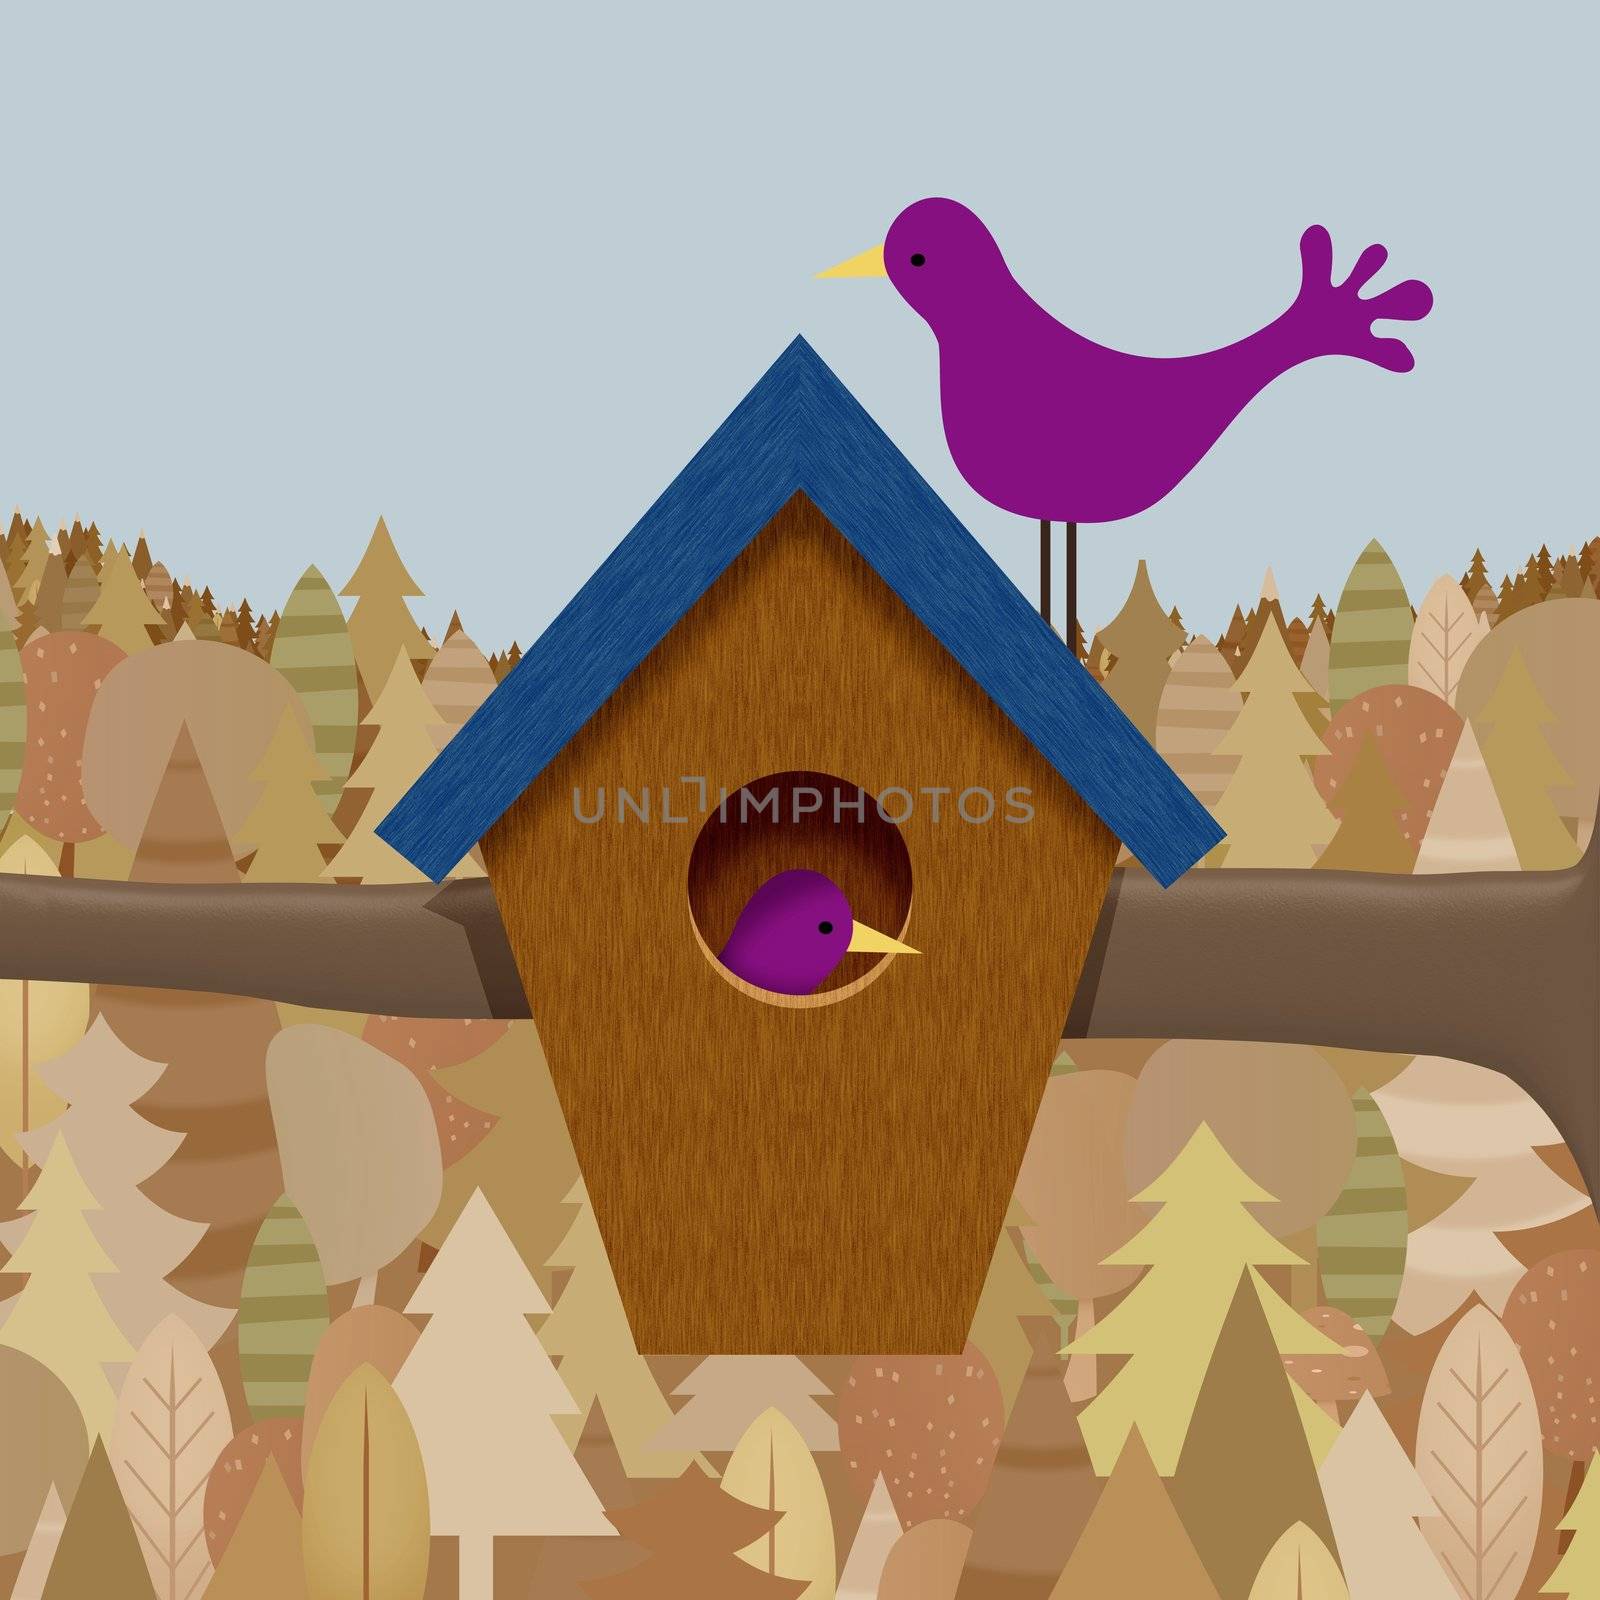 Illustration of a bird box with two birds and a forest background